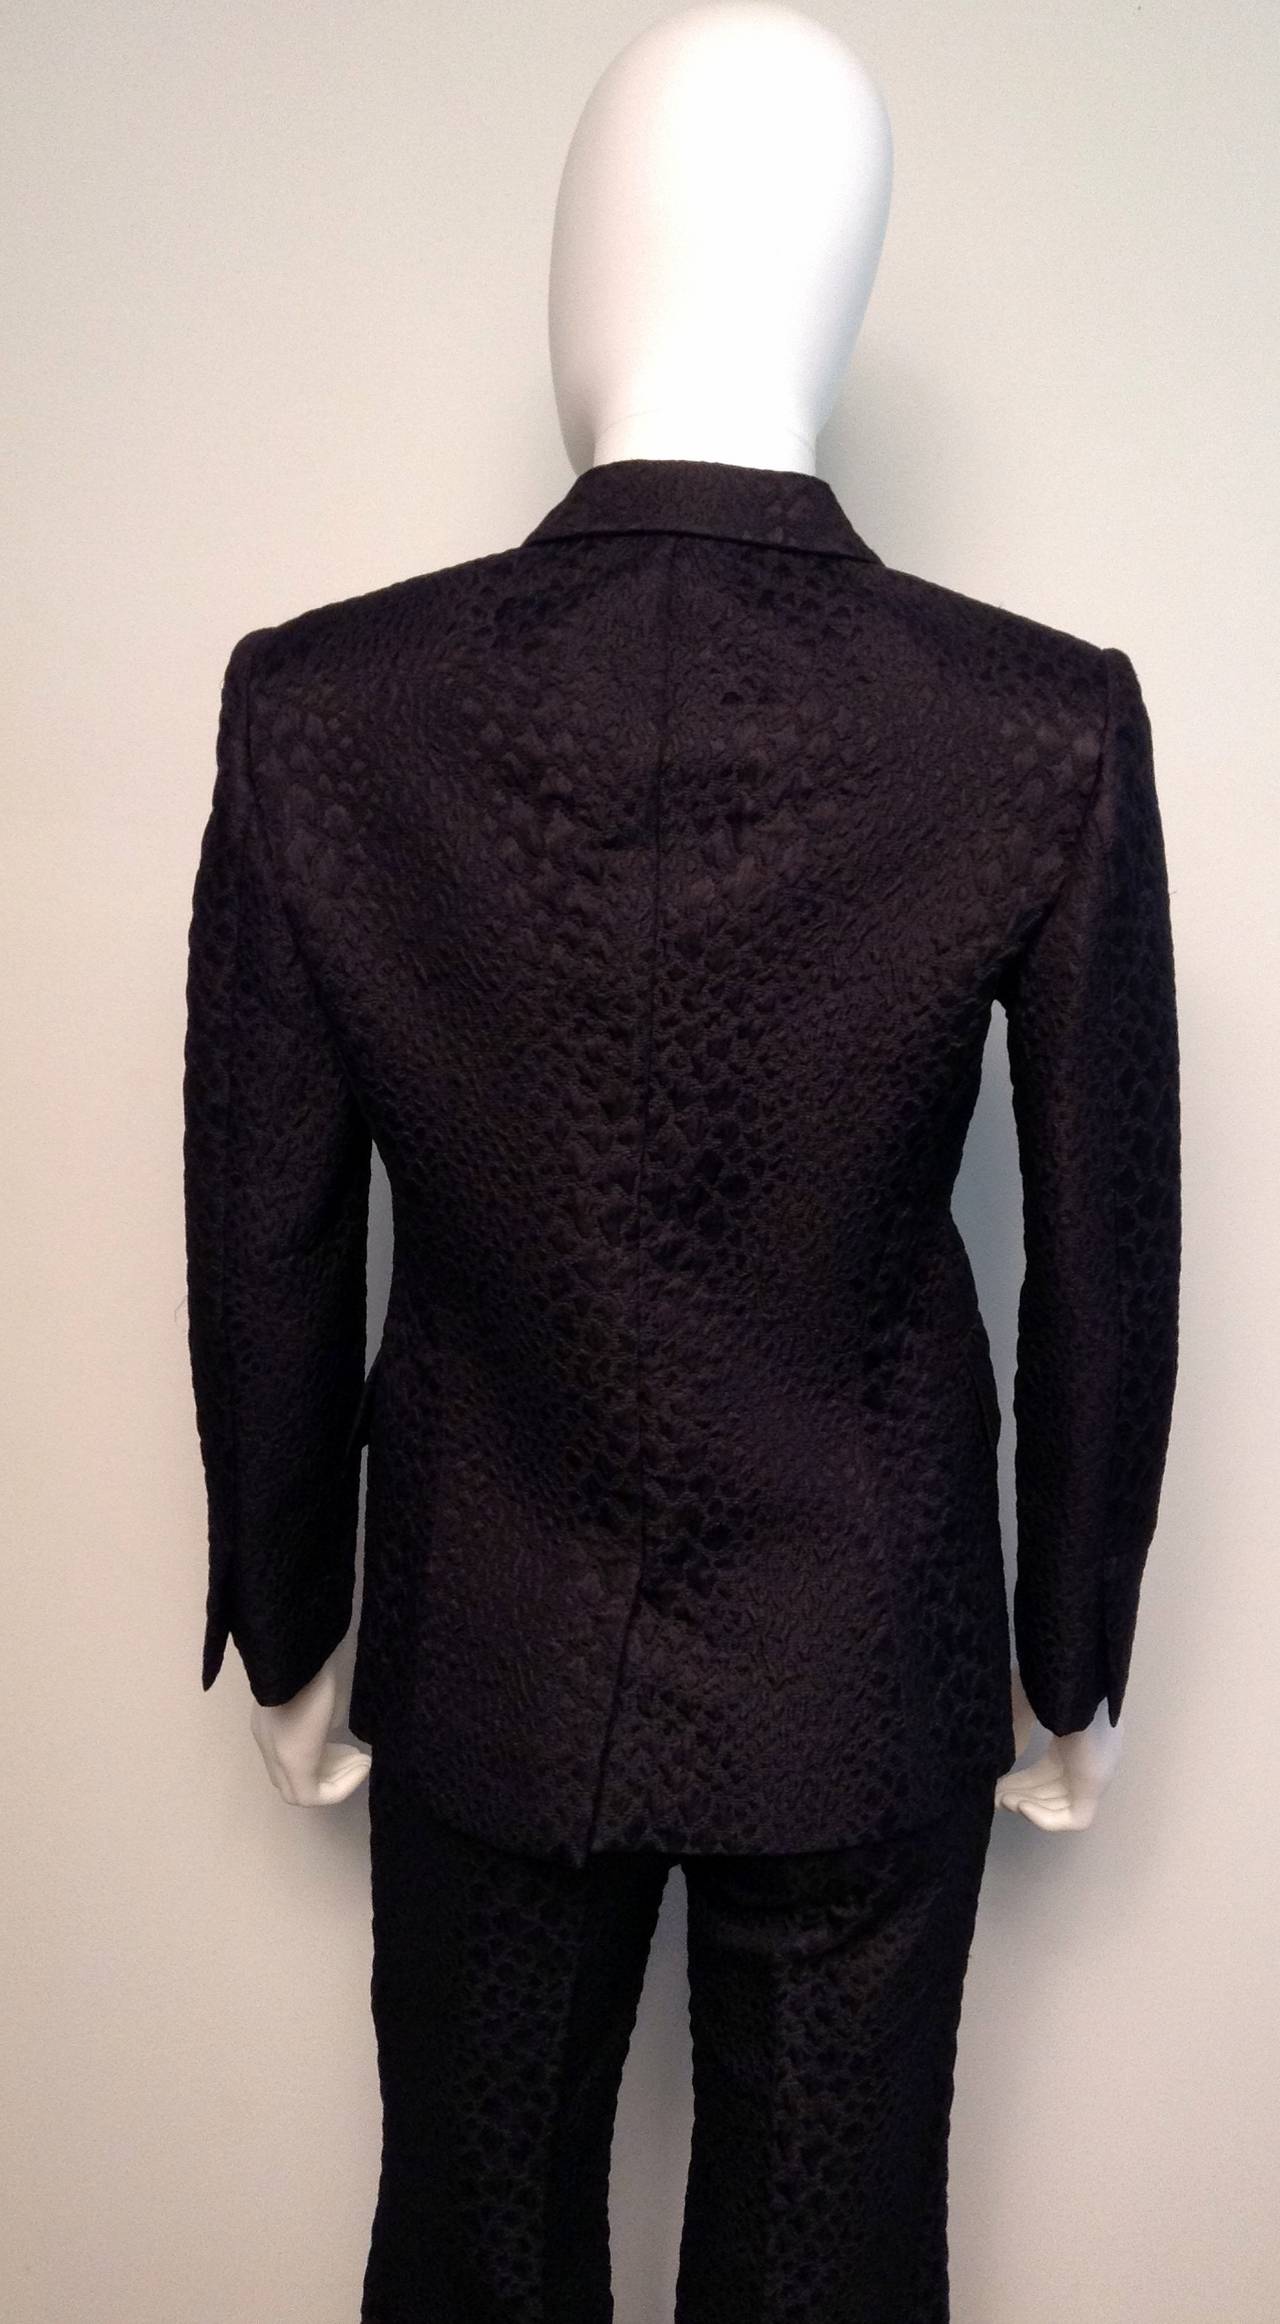 Worn only once by previous owner, an exquisite piece from Tom Ford's SS 2000 collection for Gucci. Features silver jewelled pin. 

One fabric covered black snap closure on jacket.

Pants are high waisted, with a flare leg. 

In excellent